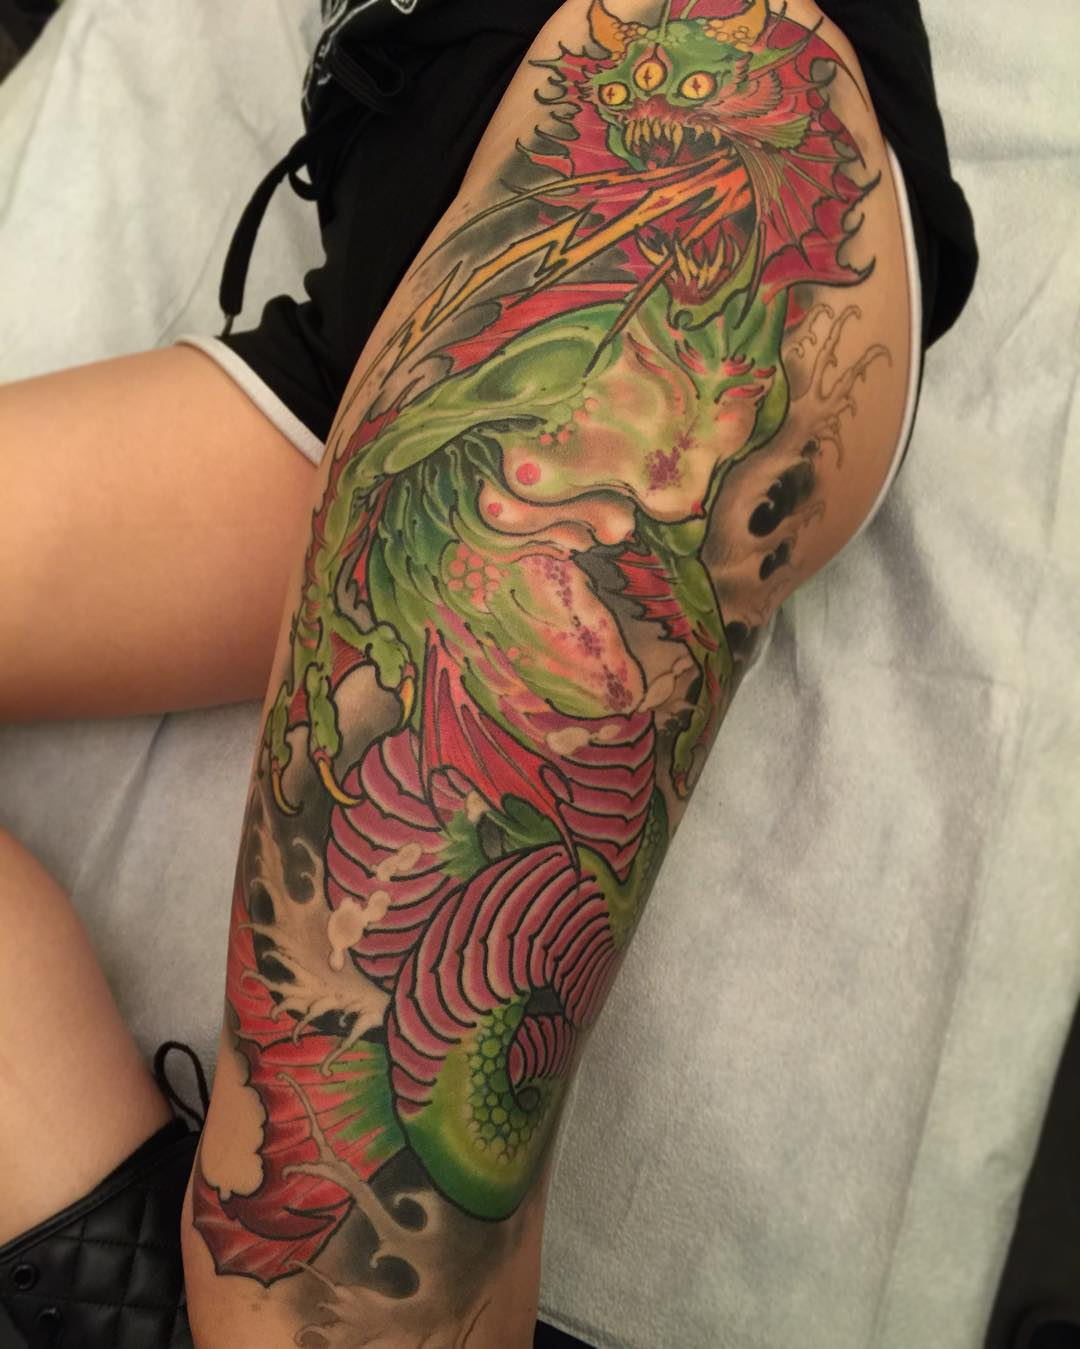 Chicago tattoo artists color tattoo